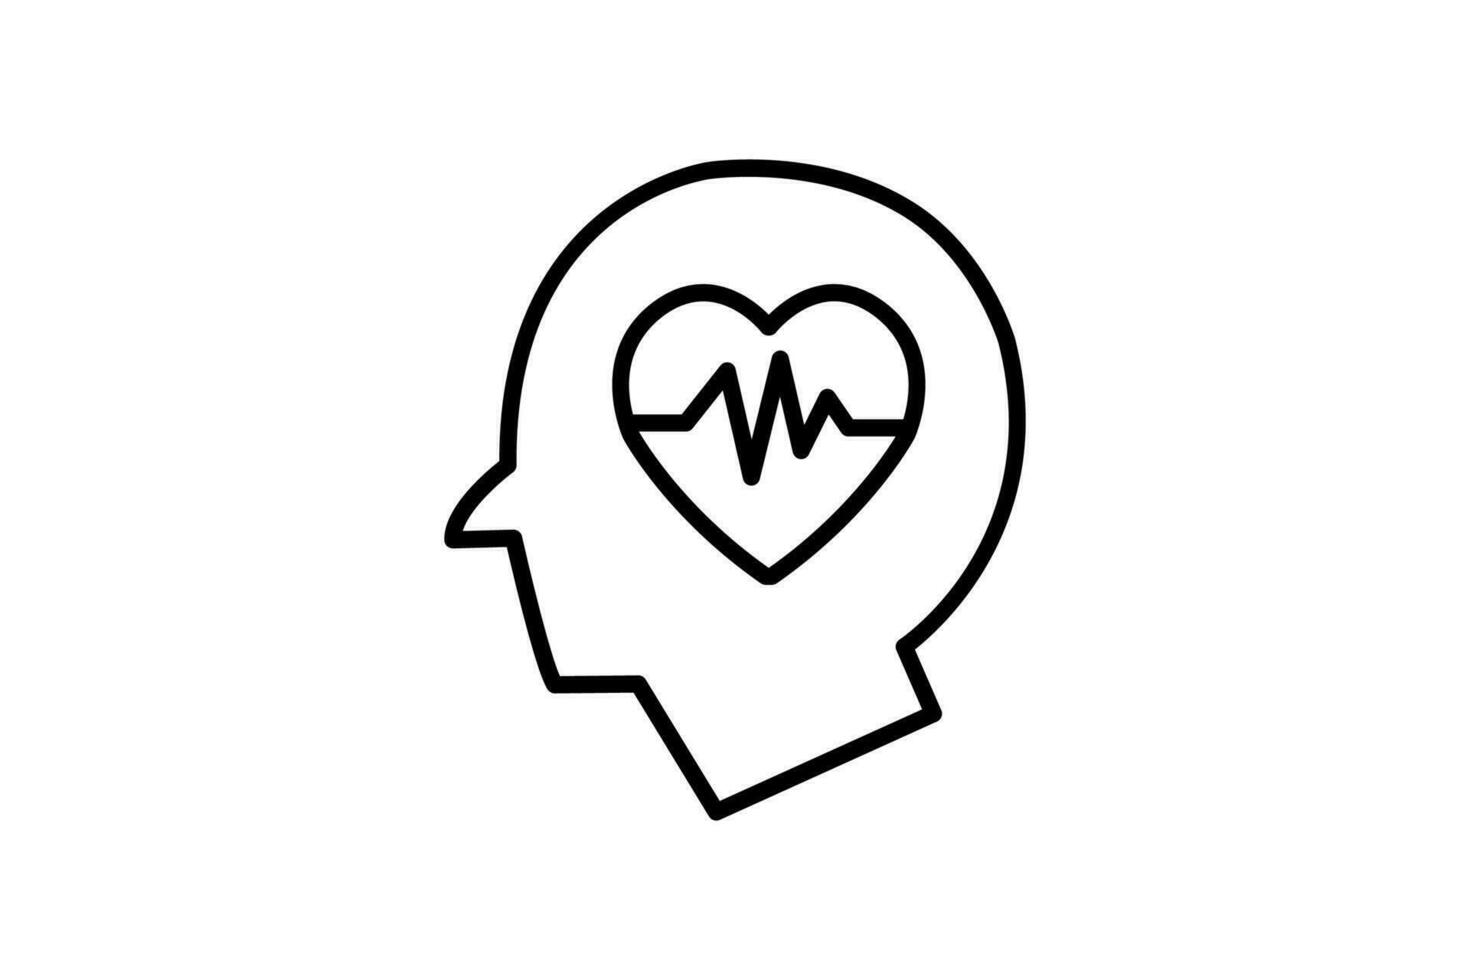 mental health icon. human head pulse icon, medical brain and heart. icon related to mental health, meditation, wellness. line icon style. simple vector design editable